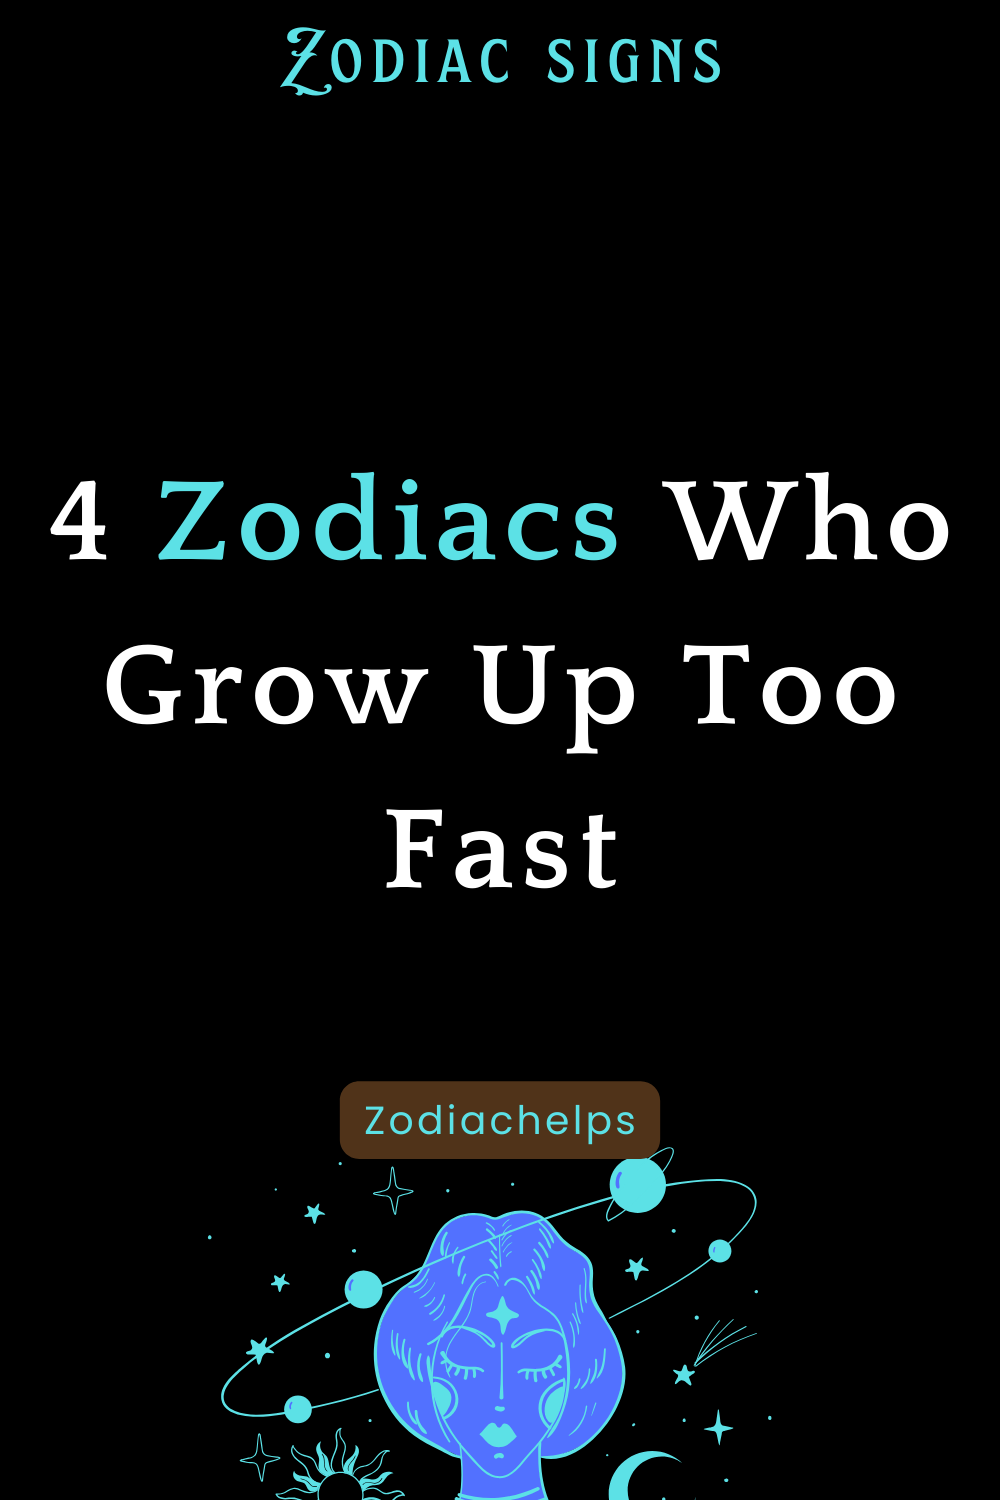 4 Zodiacs Who Grow Up Too Fast